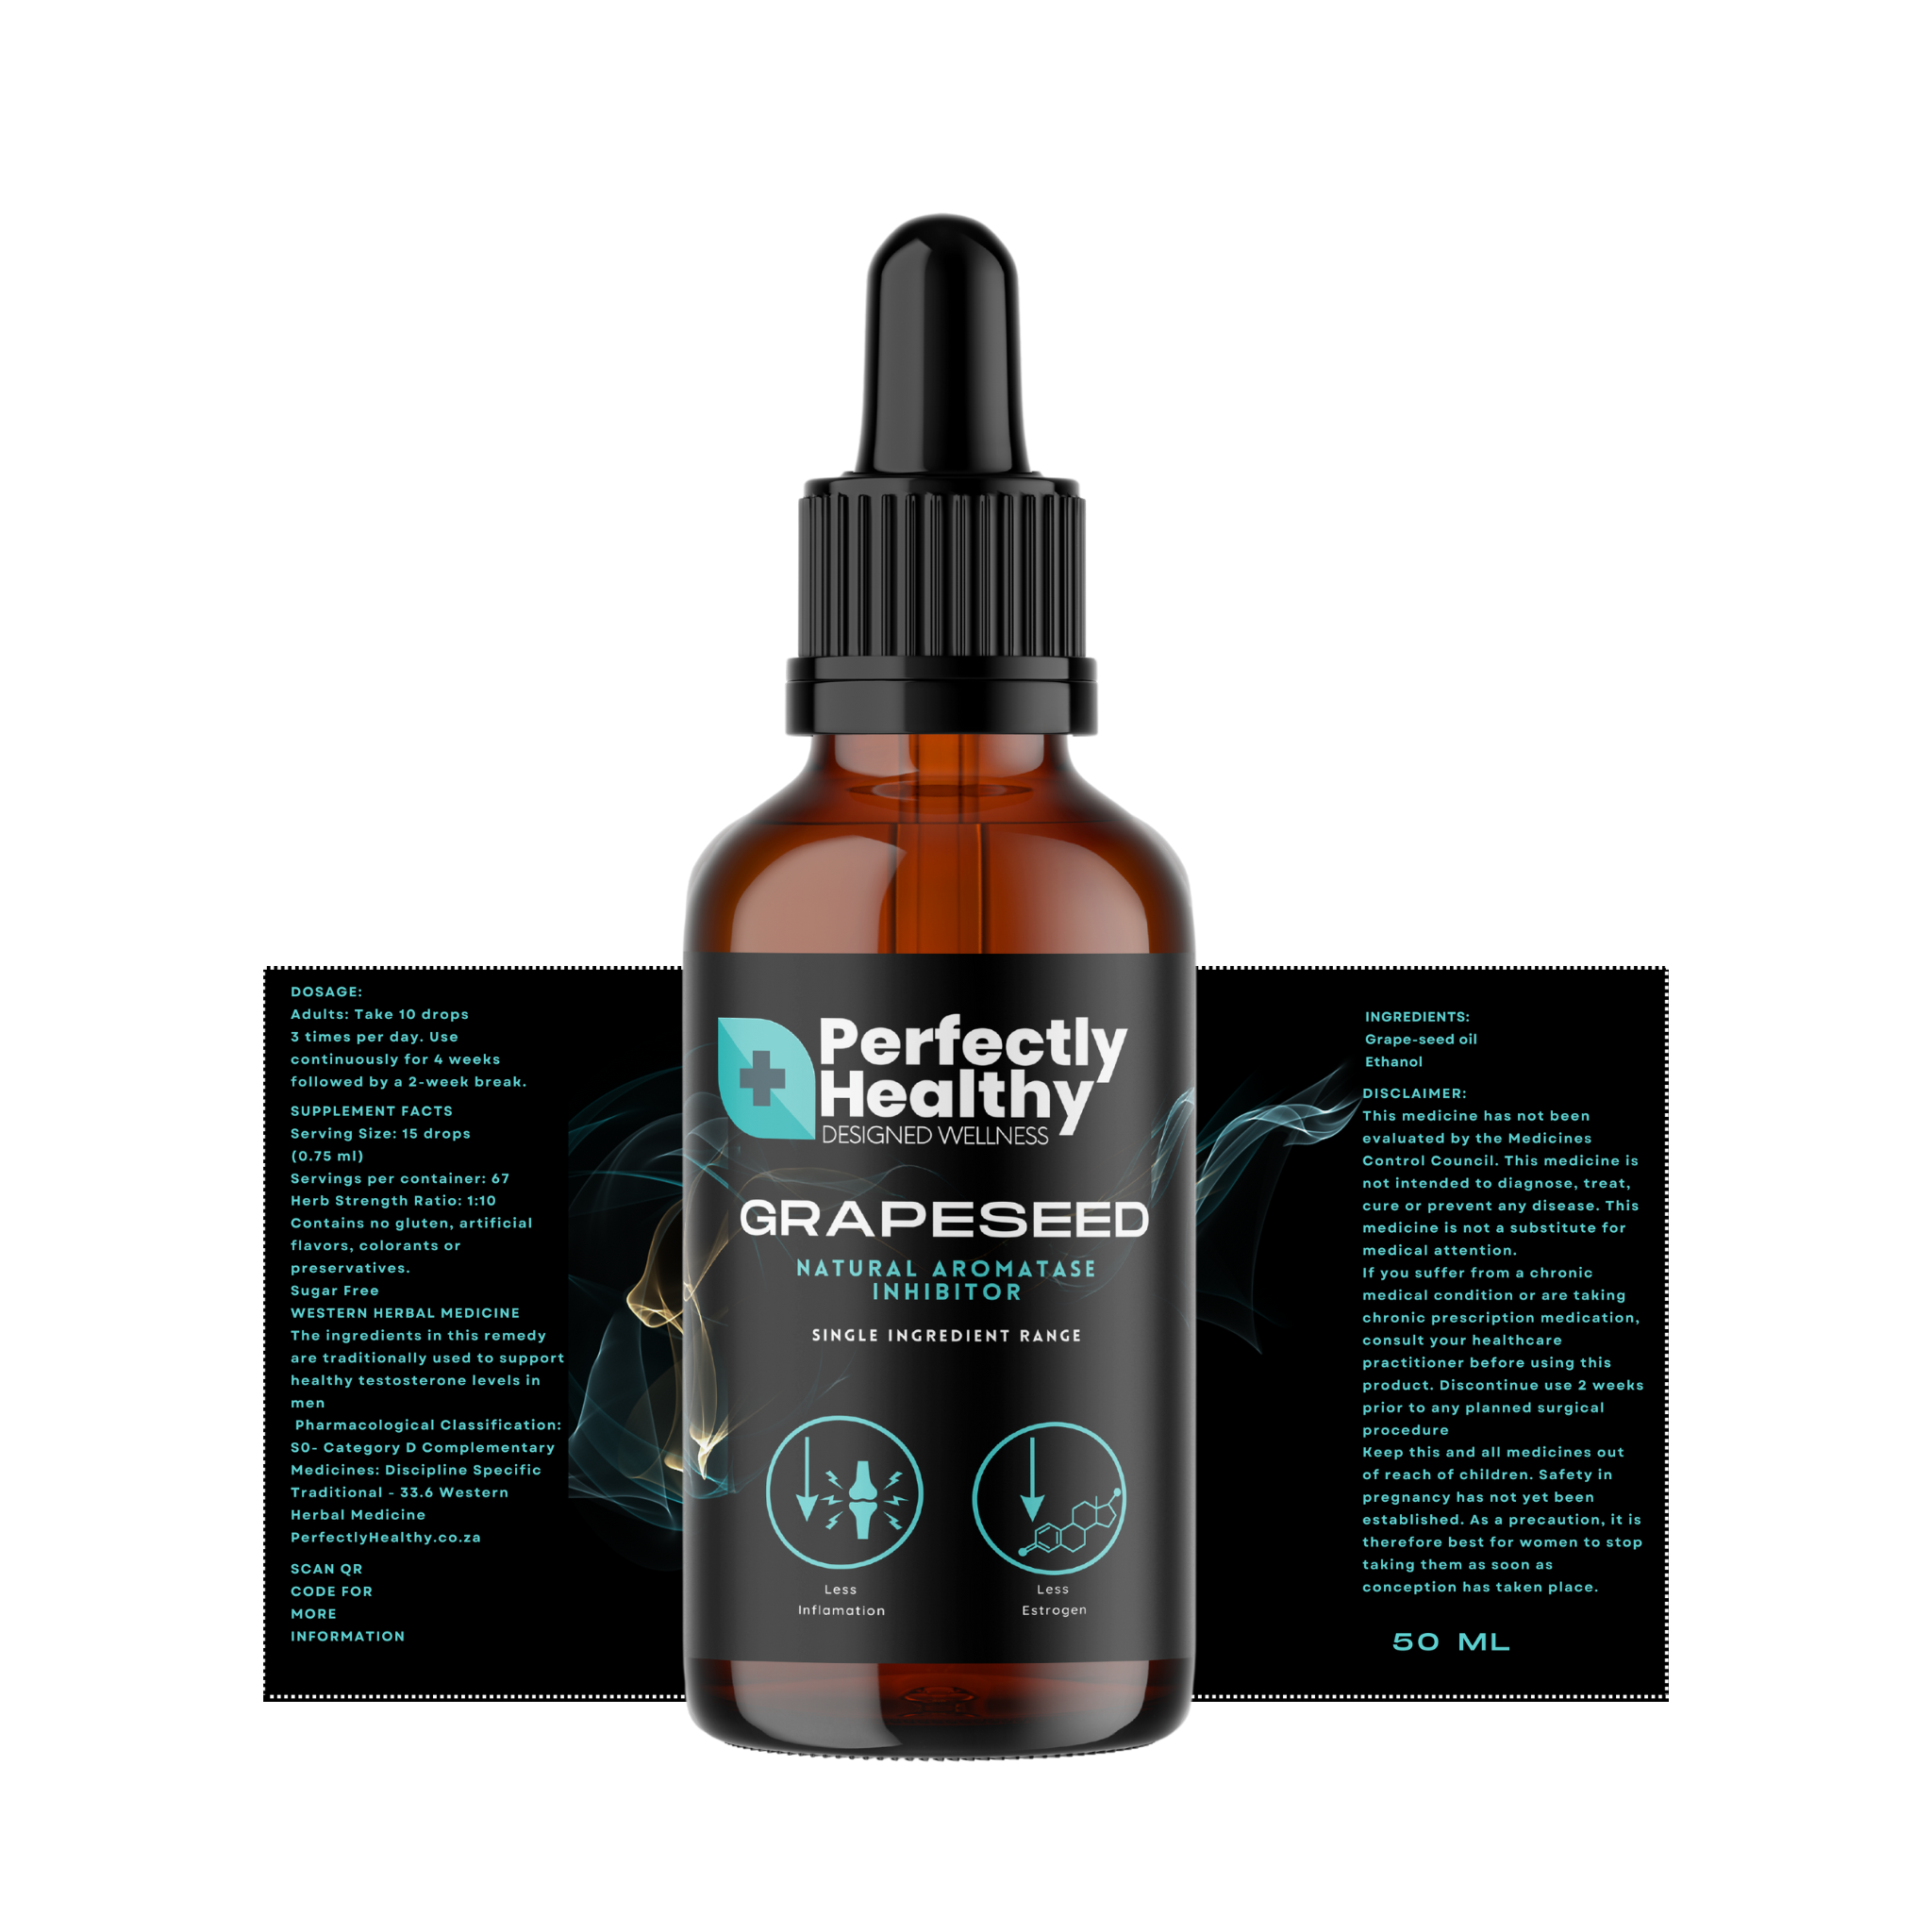 Grapeseed extract - A natural aromatase inhibitor